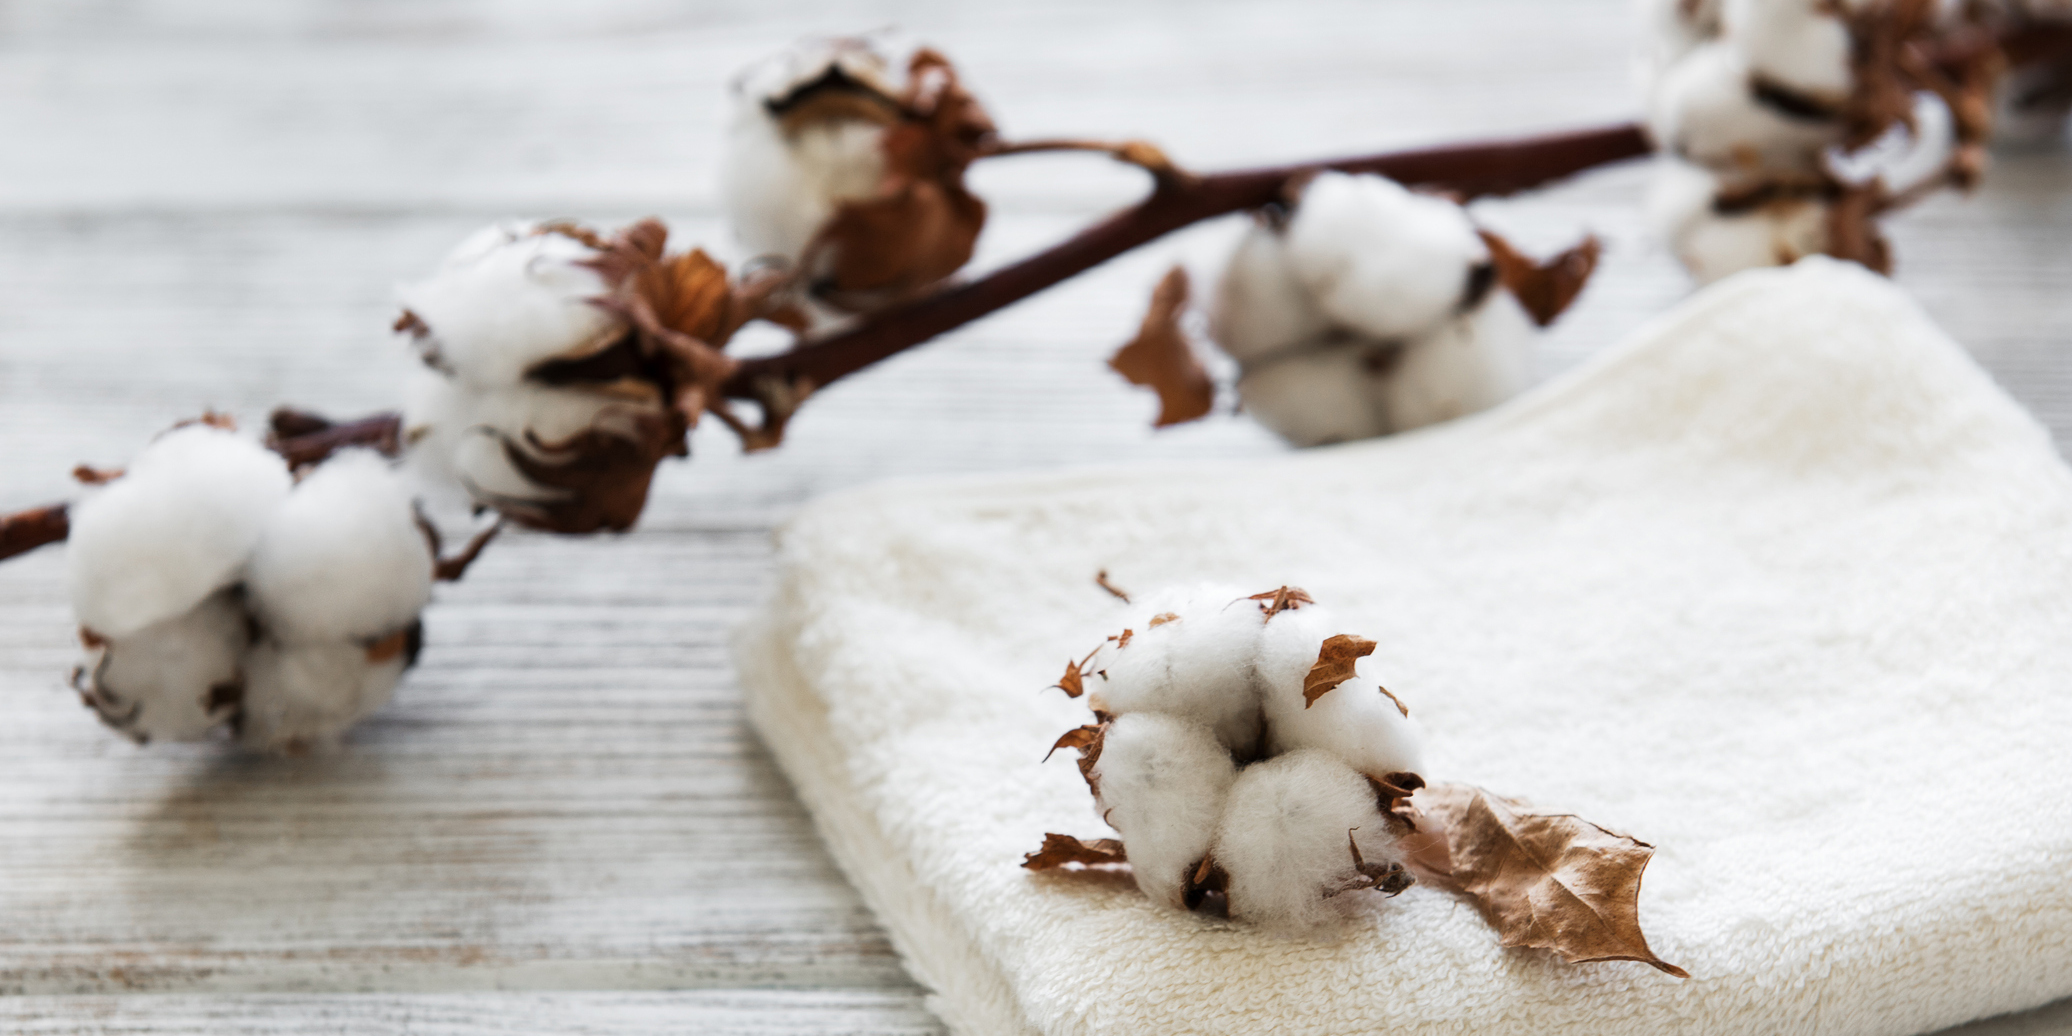 How Conventional Cotton Can Organically Meet Consumer Desires